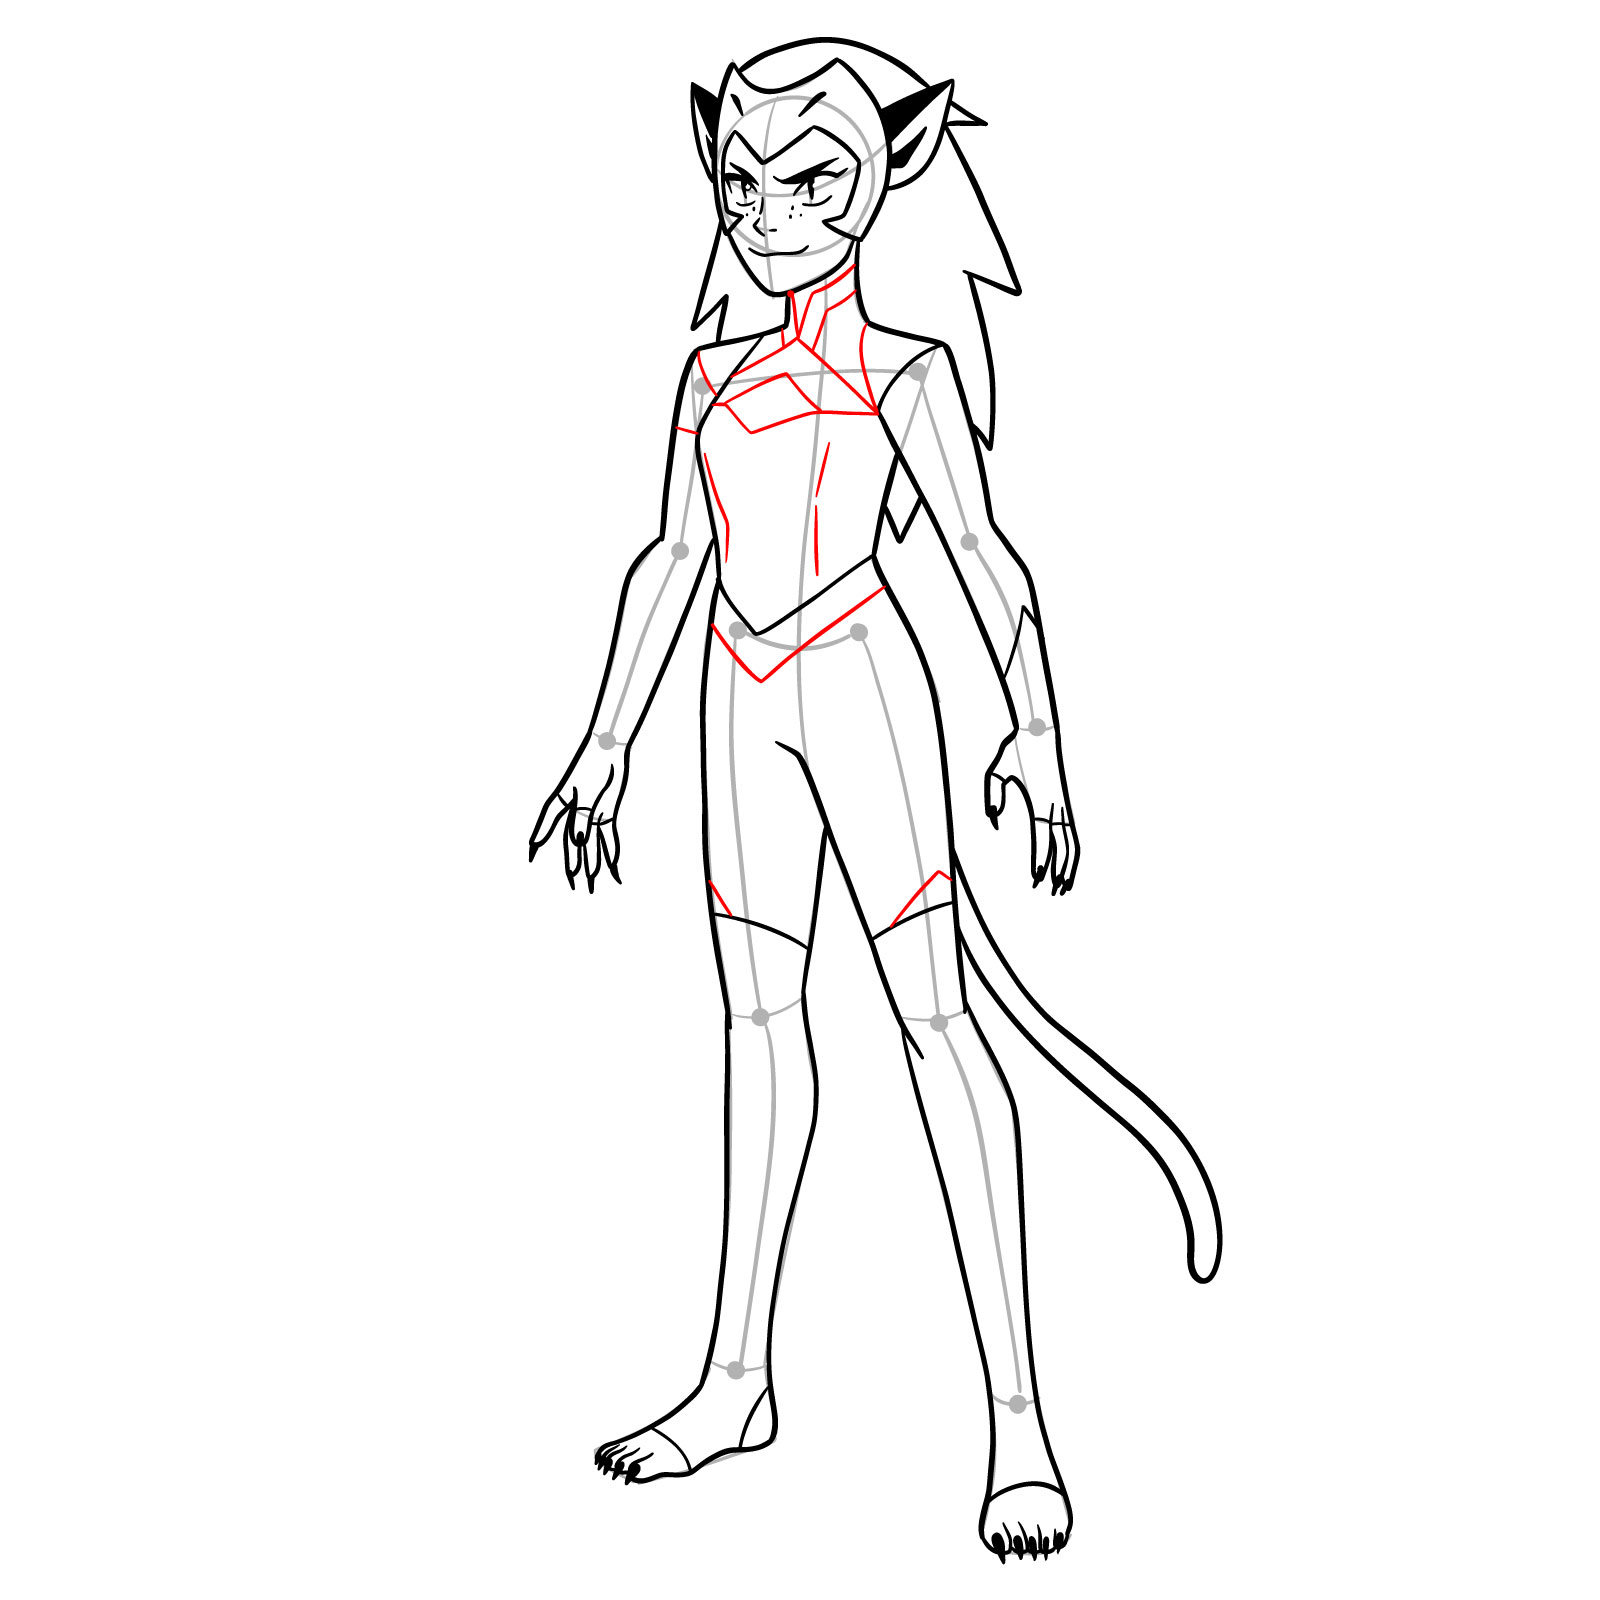 How to draw Catra from She-Ra and the Princesses of Power - step 18